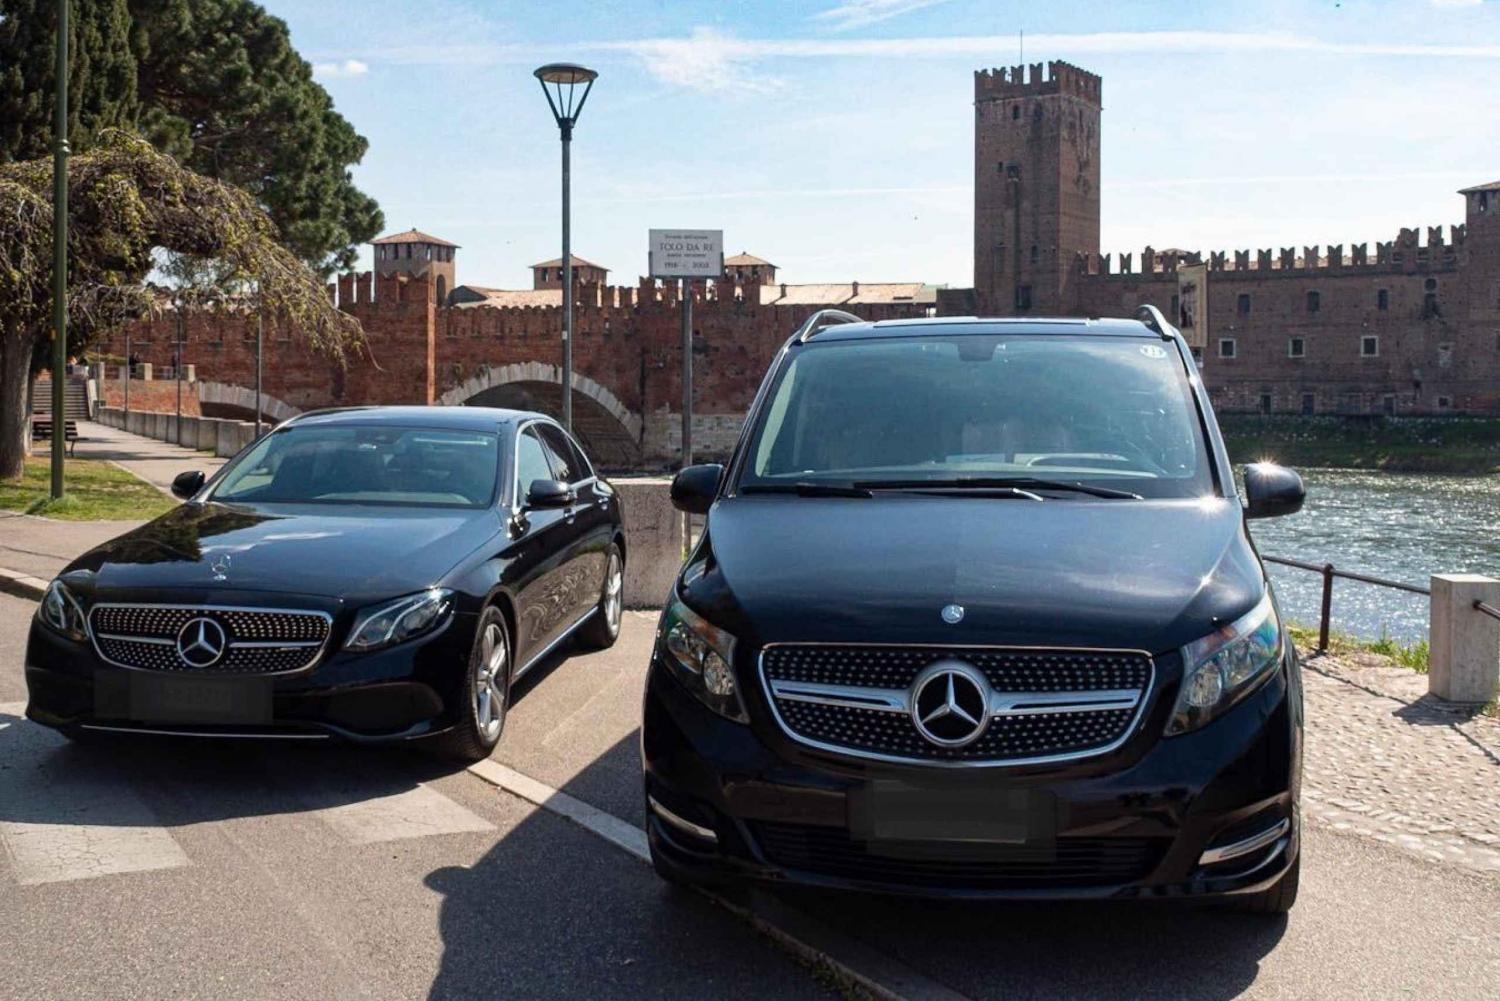 Sauze d'Oulx : Private Transfer to/from Malpensa Airport